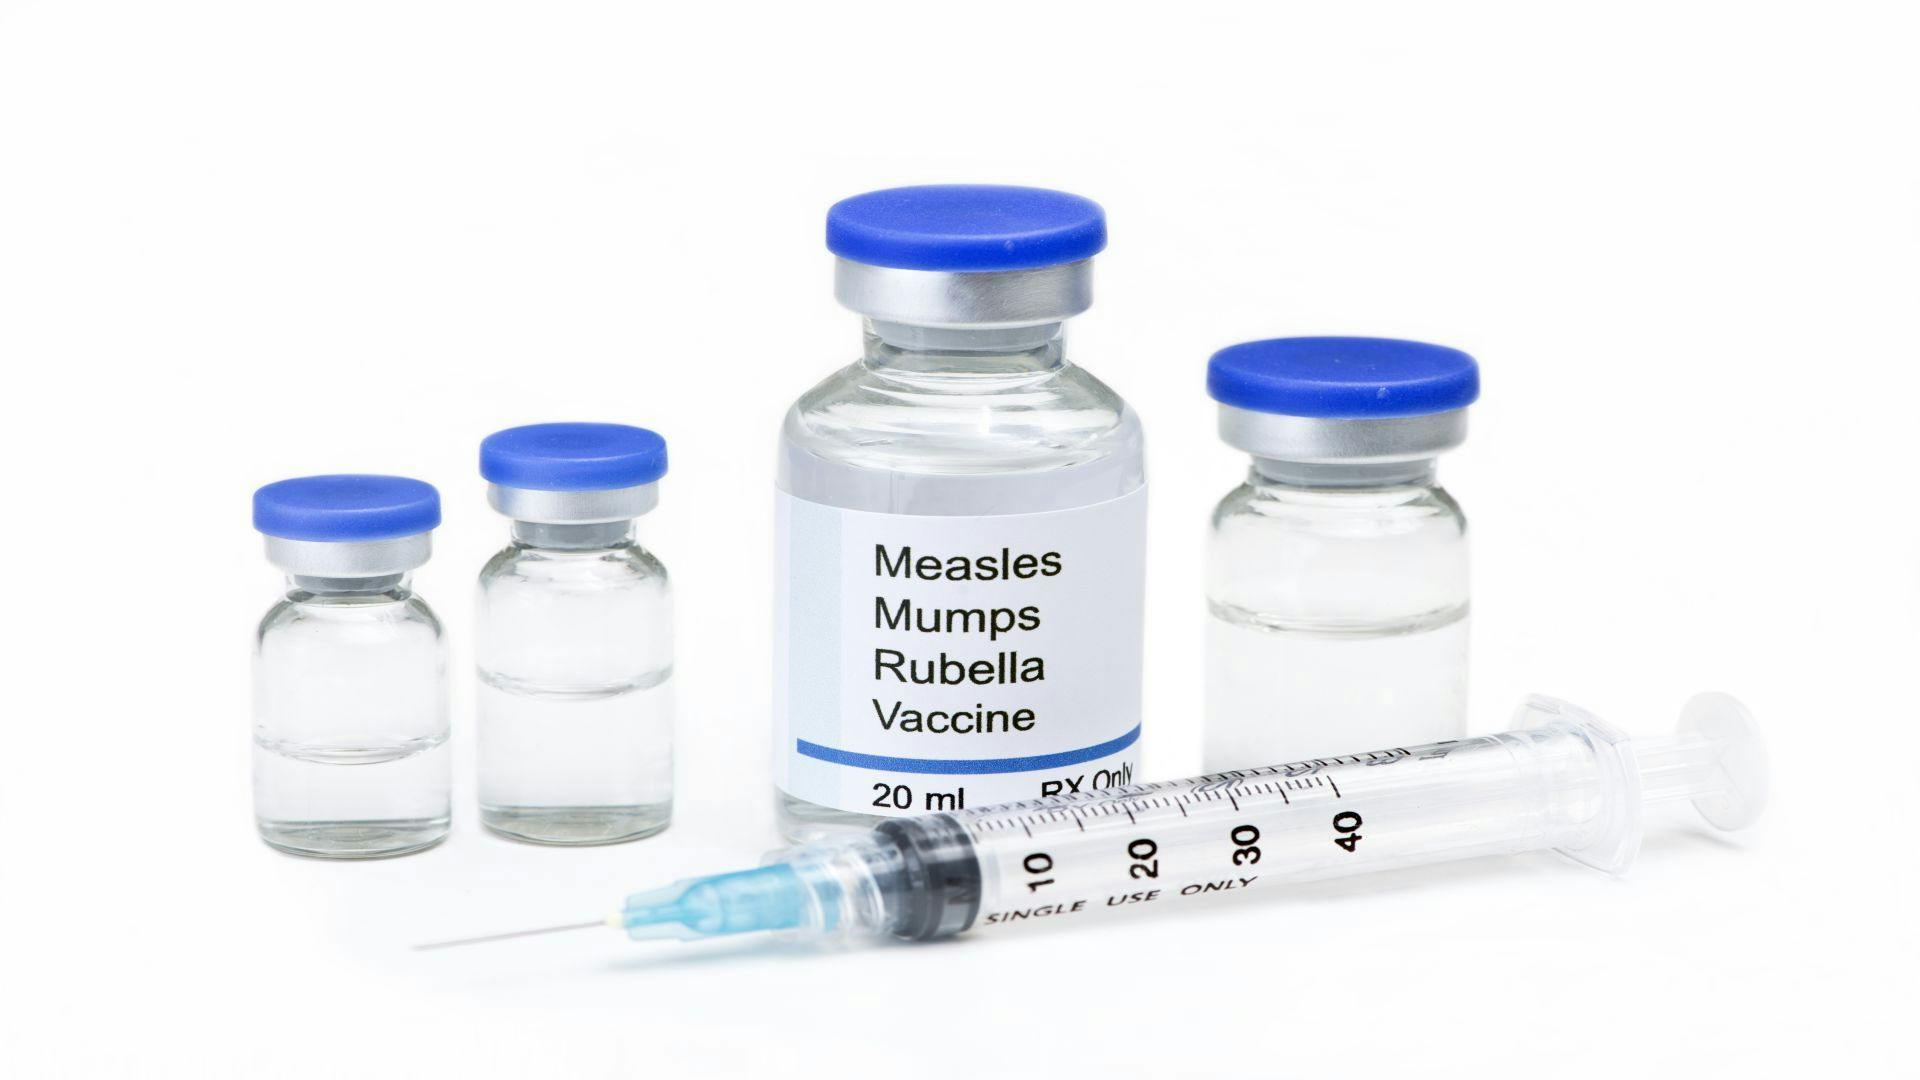 Pro-Vaccine Messages Can Boost Belief in MMR Myths, Study Shows